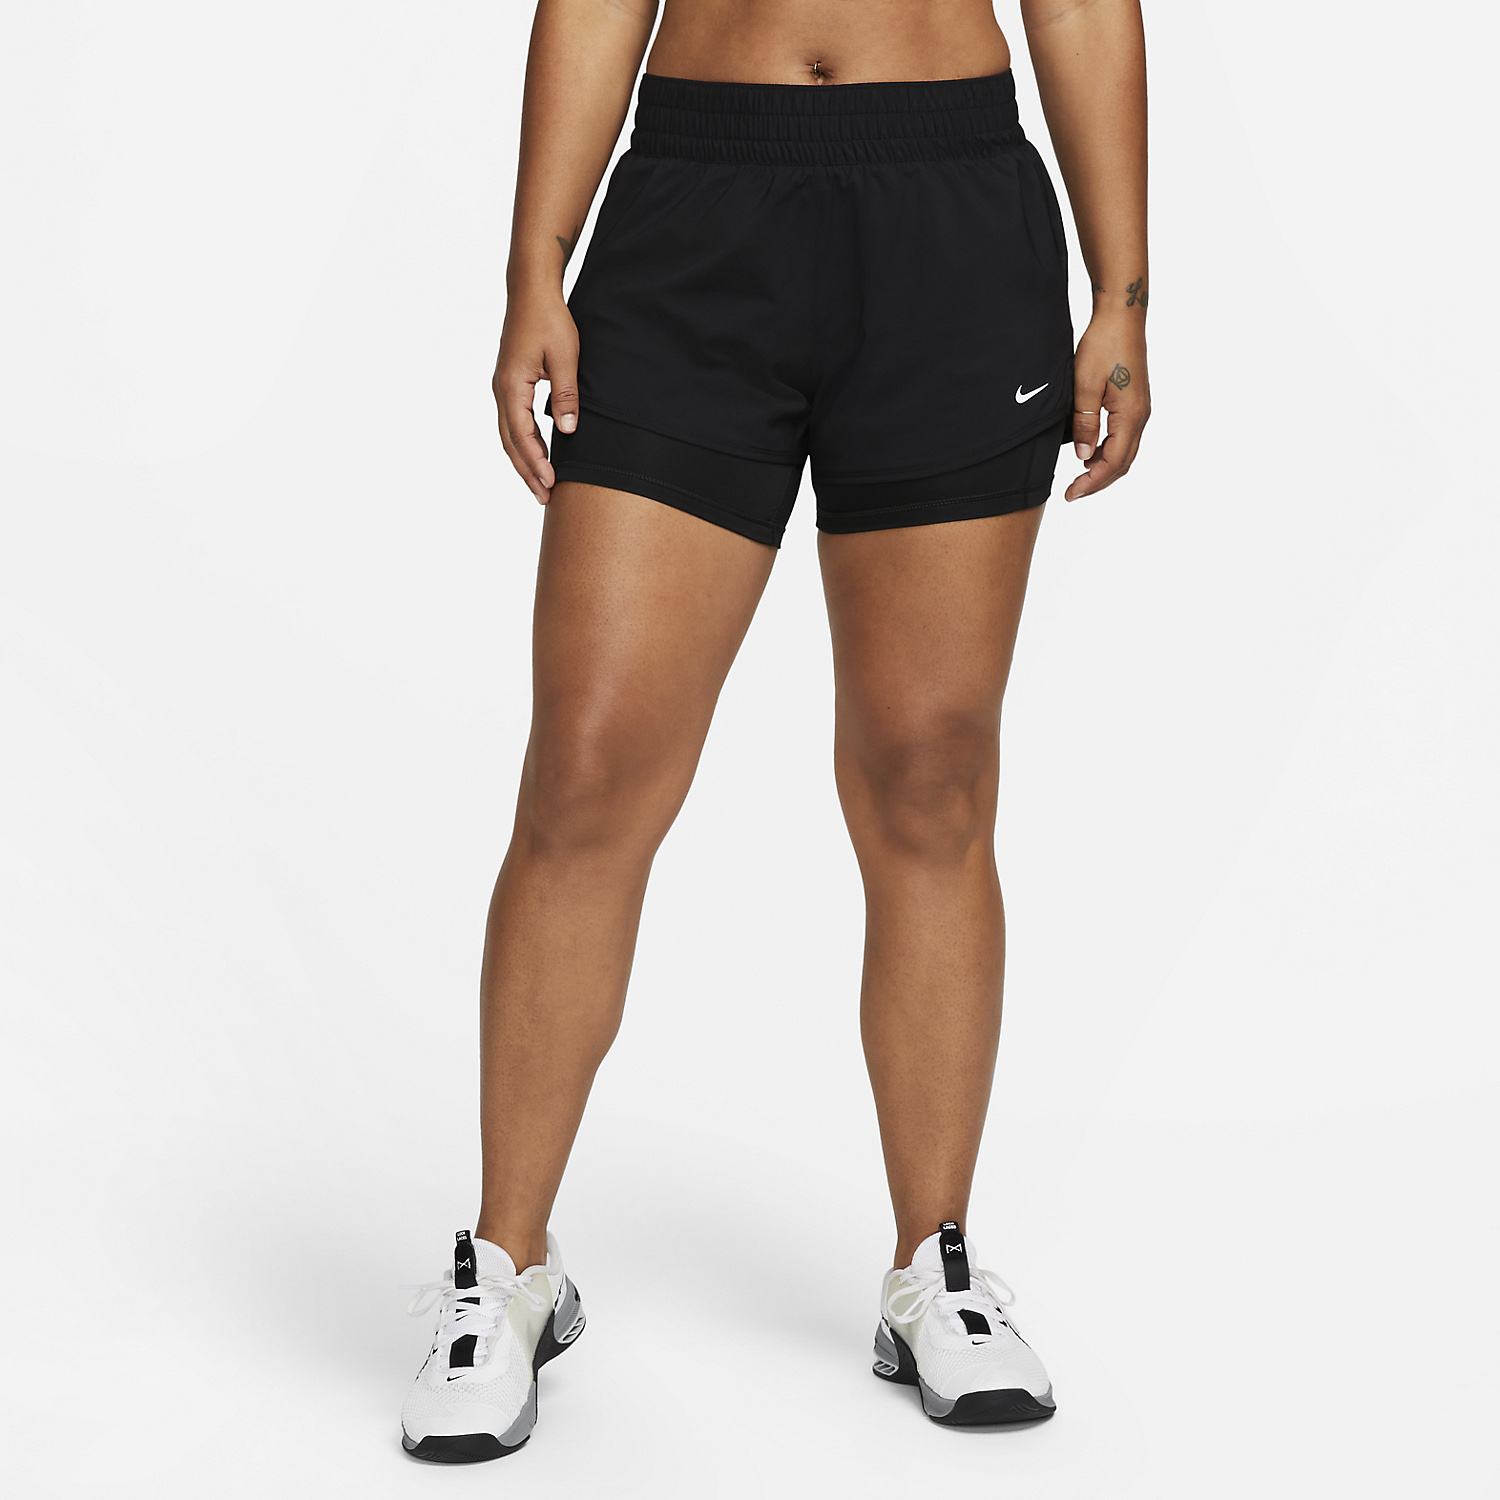 Nike One 2 in 1 3in Shorts - Black/Reflective Silver